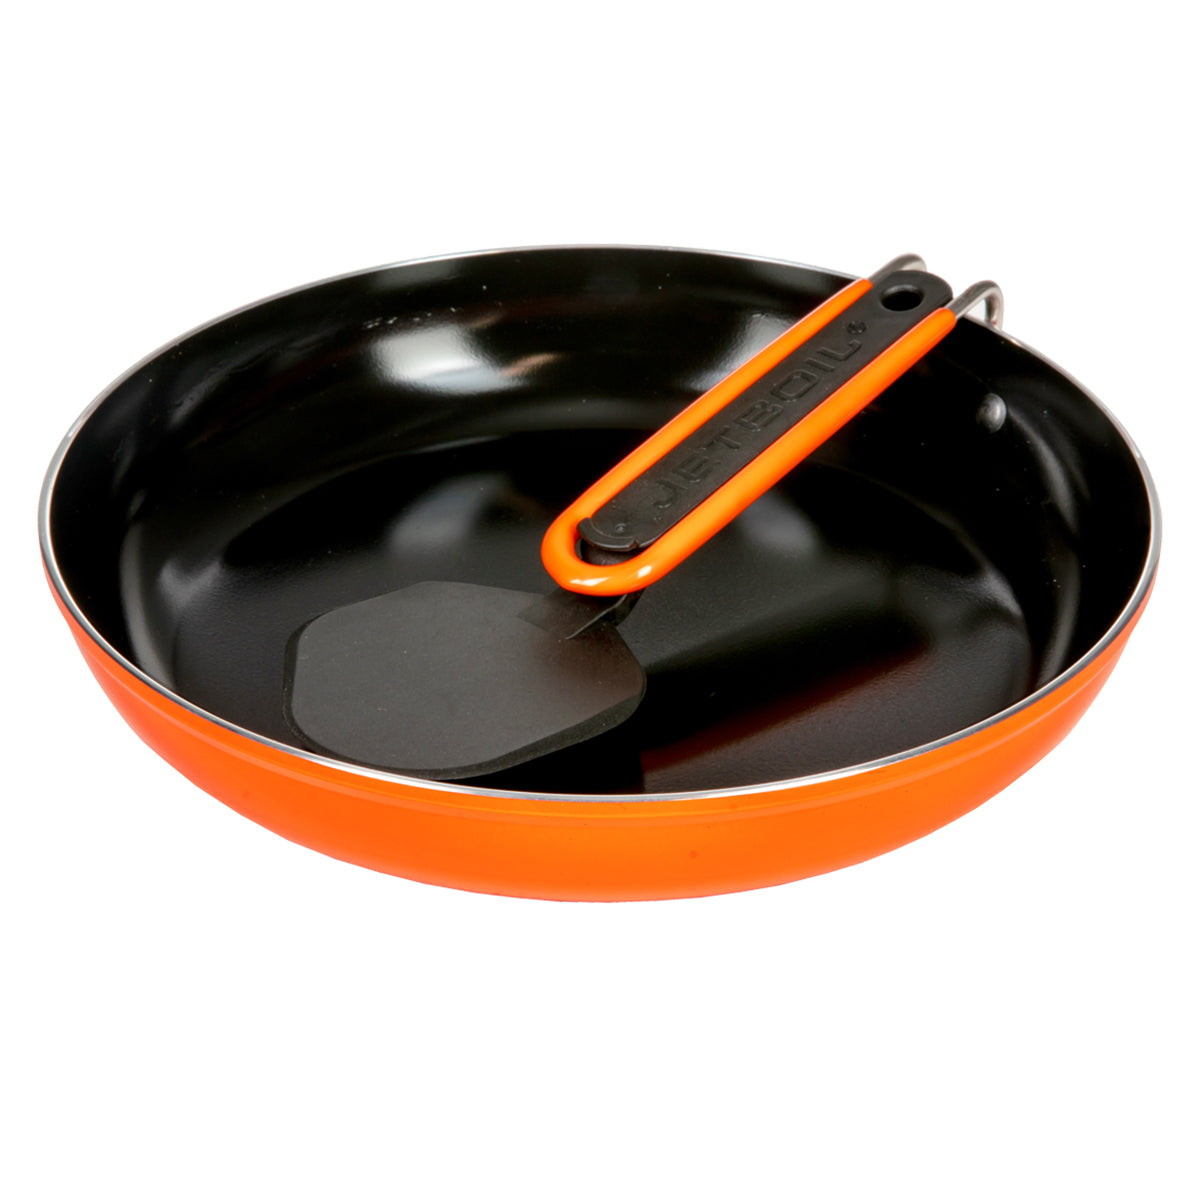 Jetboil Summit Skillet in Jetboil Summit Skillet by Jetboil | Camping - goHUNT Shop by GOHUNT | Jetboil - GOHUNT Shop